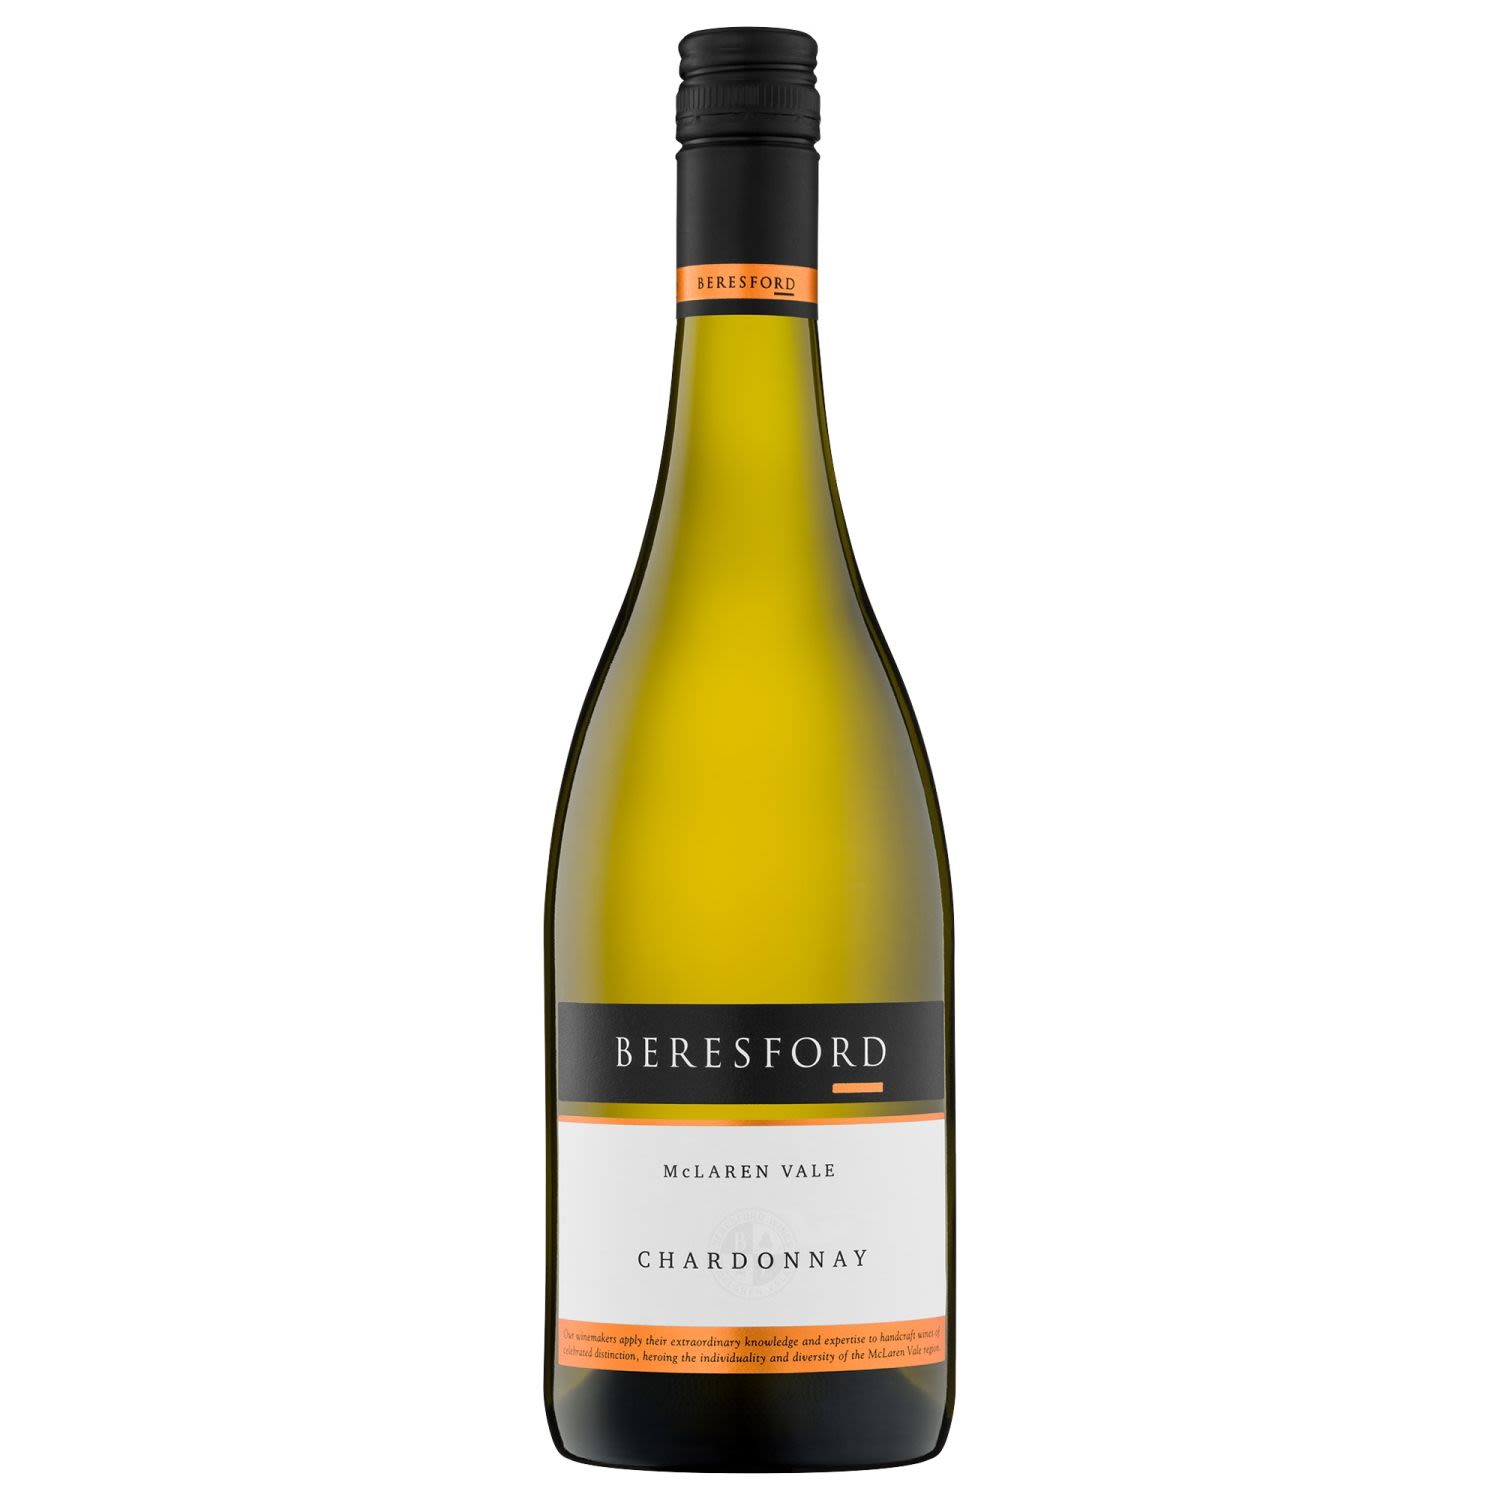 Beresford Classic Chardonnay displays all the hallmarks of what makes McLaren Vale Chardonnay so popular. Peaches, melons, citrus and a creamy mid-palate that carries through to the finish.<br /> <br />Alcohol Volume: 12.60%<br /><br />Pack Format: Bottle<br /><br />Standard Drinks: 7.5</br /><br />Pack Type: Bottle<br /><br />Country of Origin: Australia<br /><br />Region: McLaren Vale<br /><br />Vintage: Vintages Vary<br />